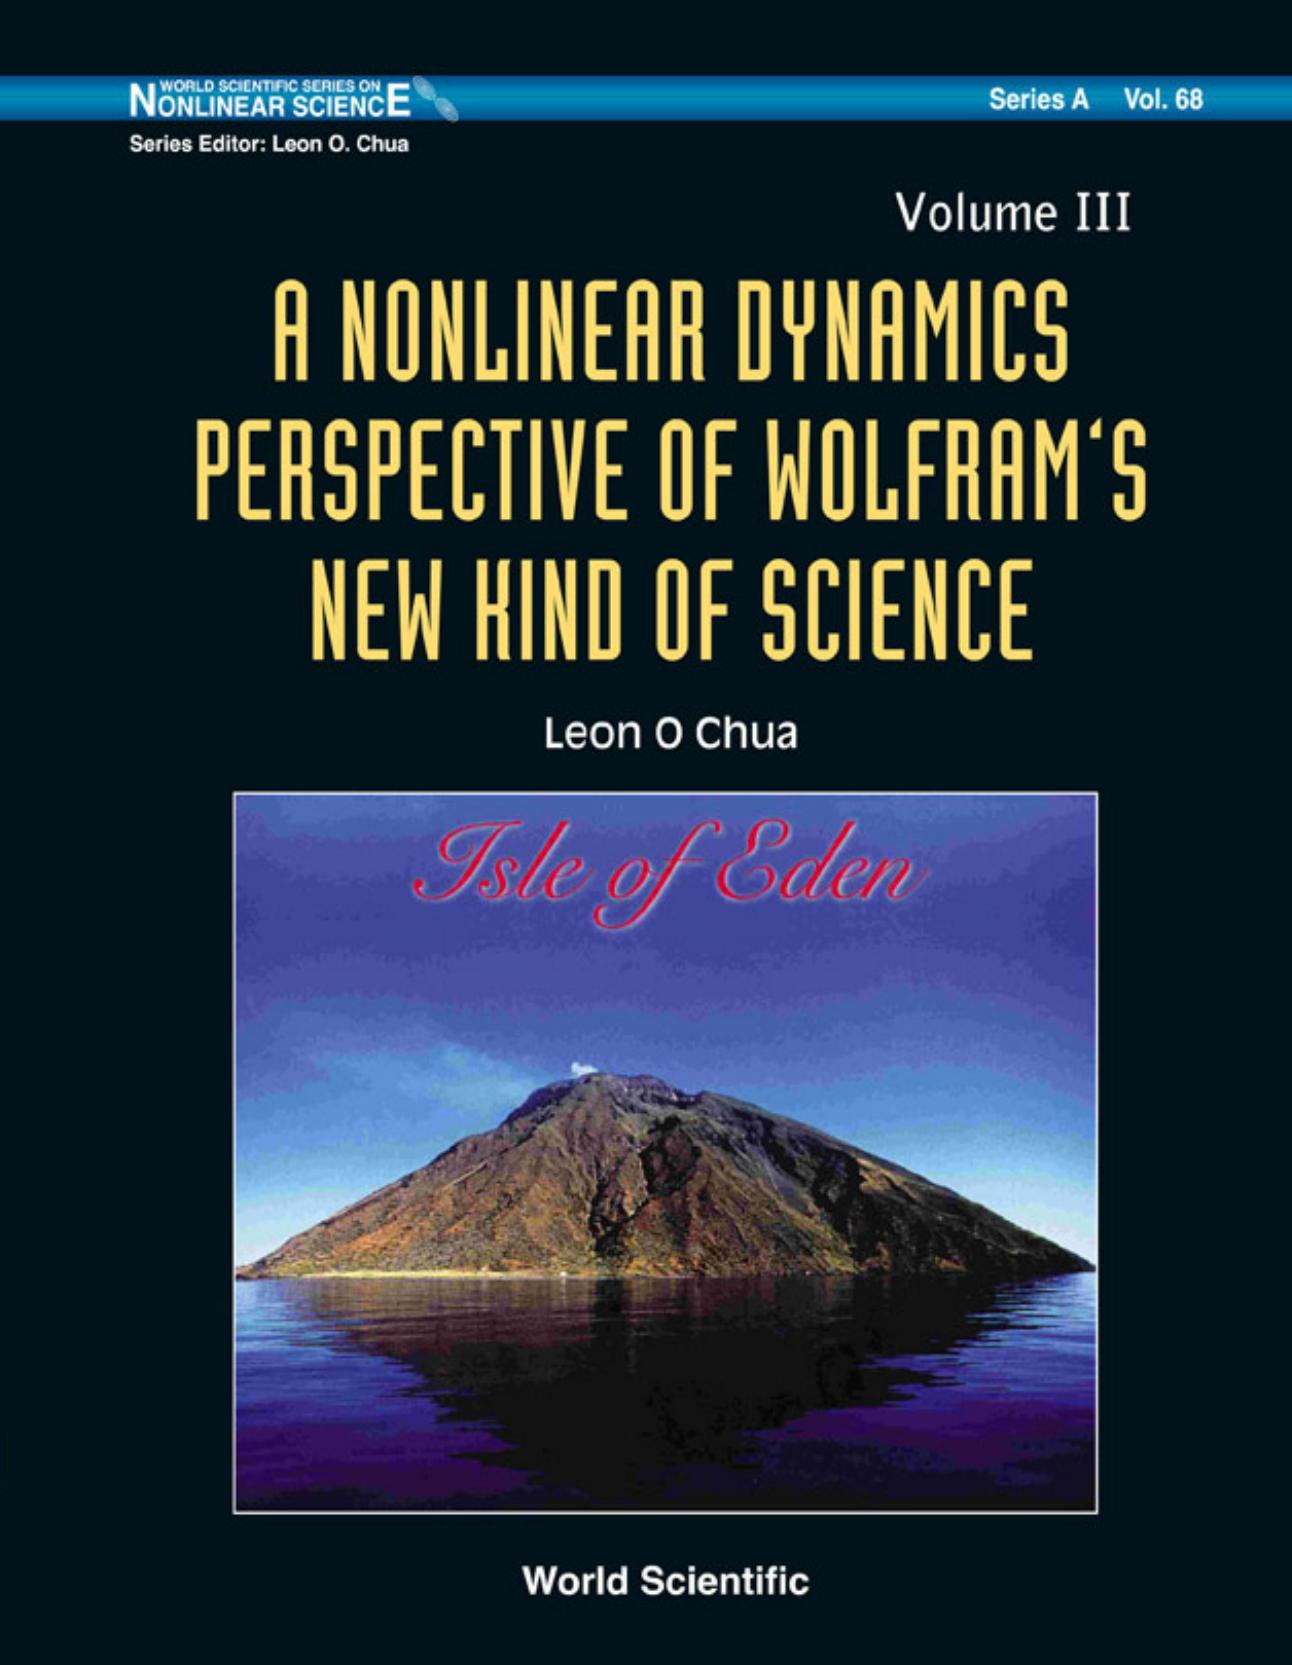 A Nonlinear Dynamics Perspective of Wolfram's New Kind of Science - Volume 3